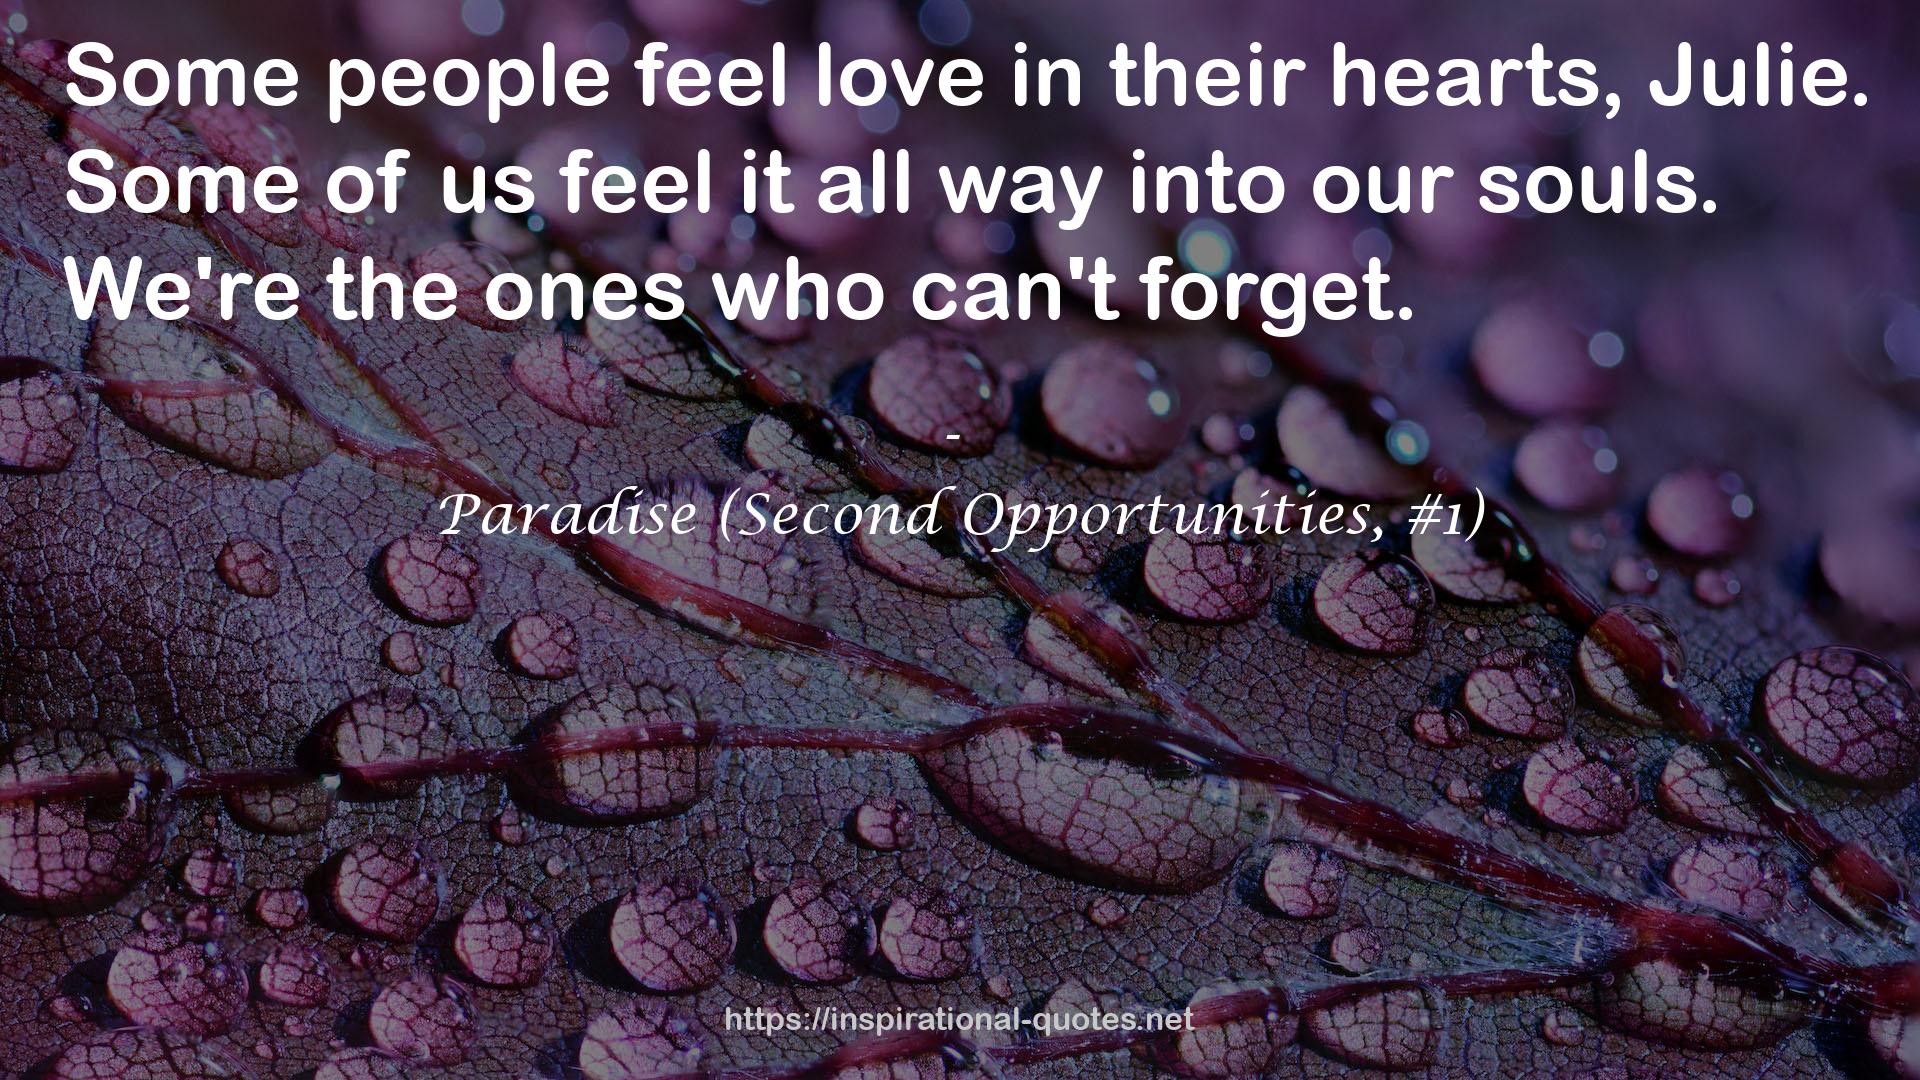 Paradise (Second Opportunities, #1) QUOTES